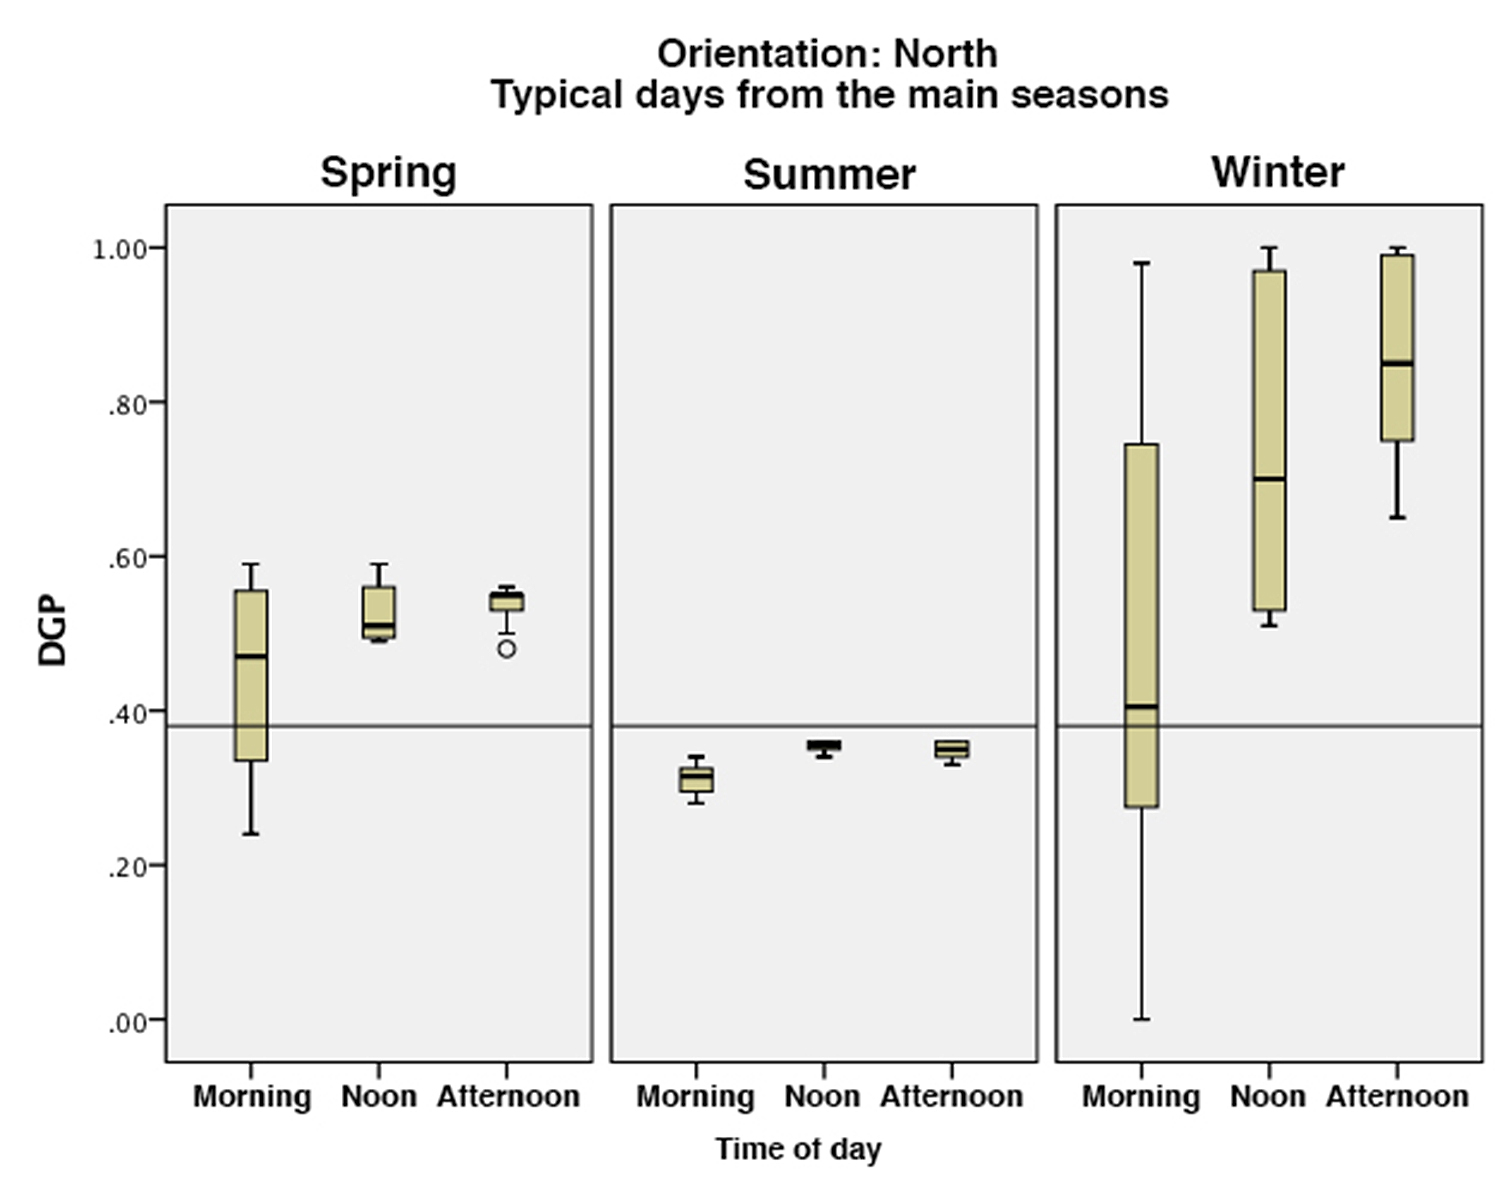 Box plot of DGP values for o_north on typical seasonal days in different times of day.